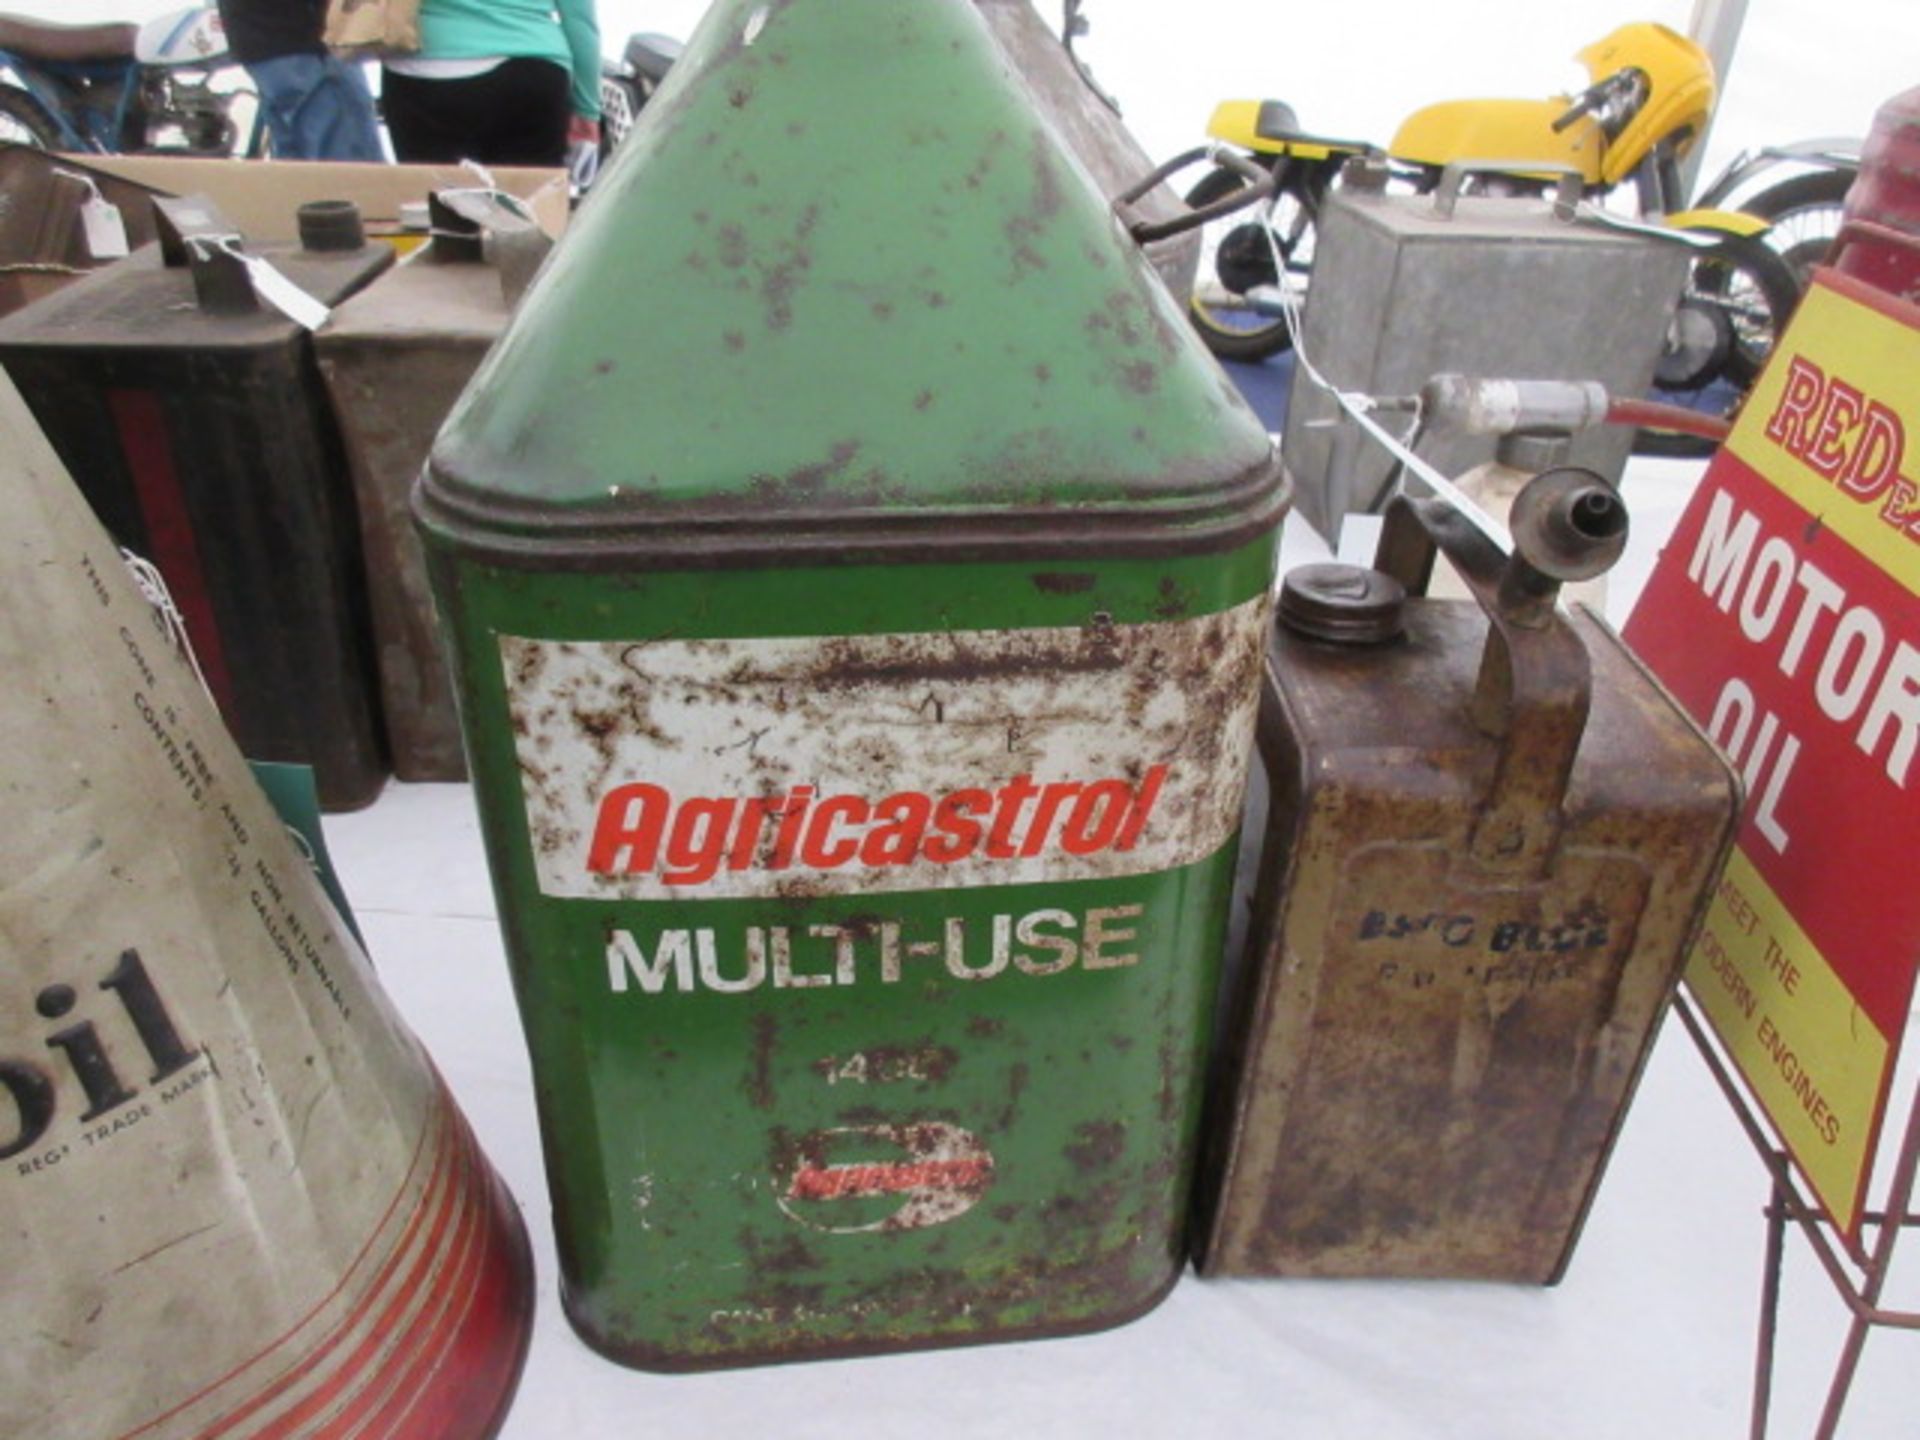 Agricastrol square multi use oil can t/w Valor paraffin can